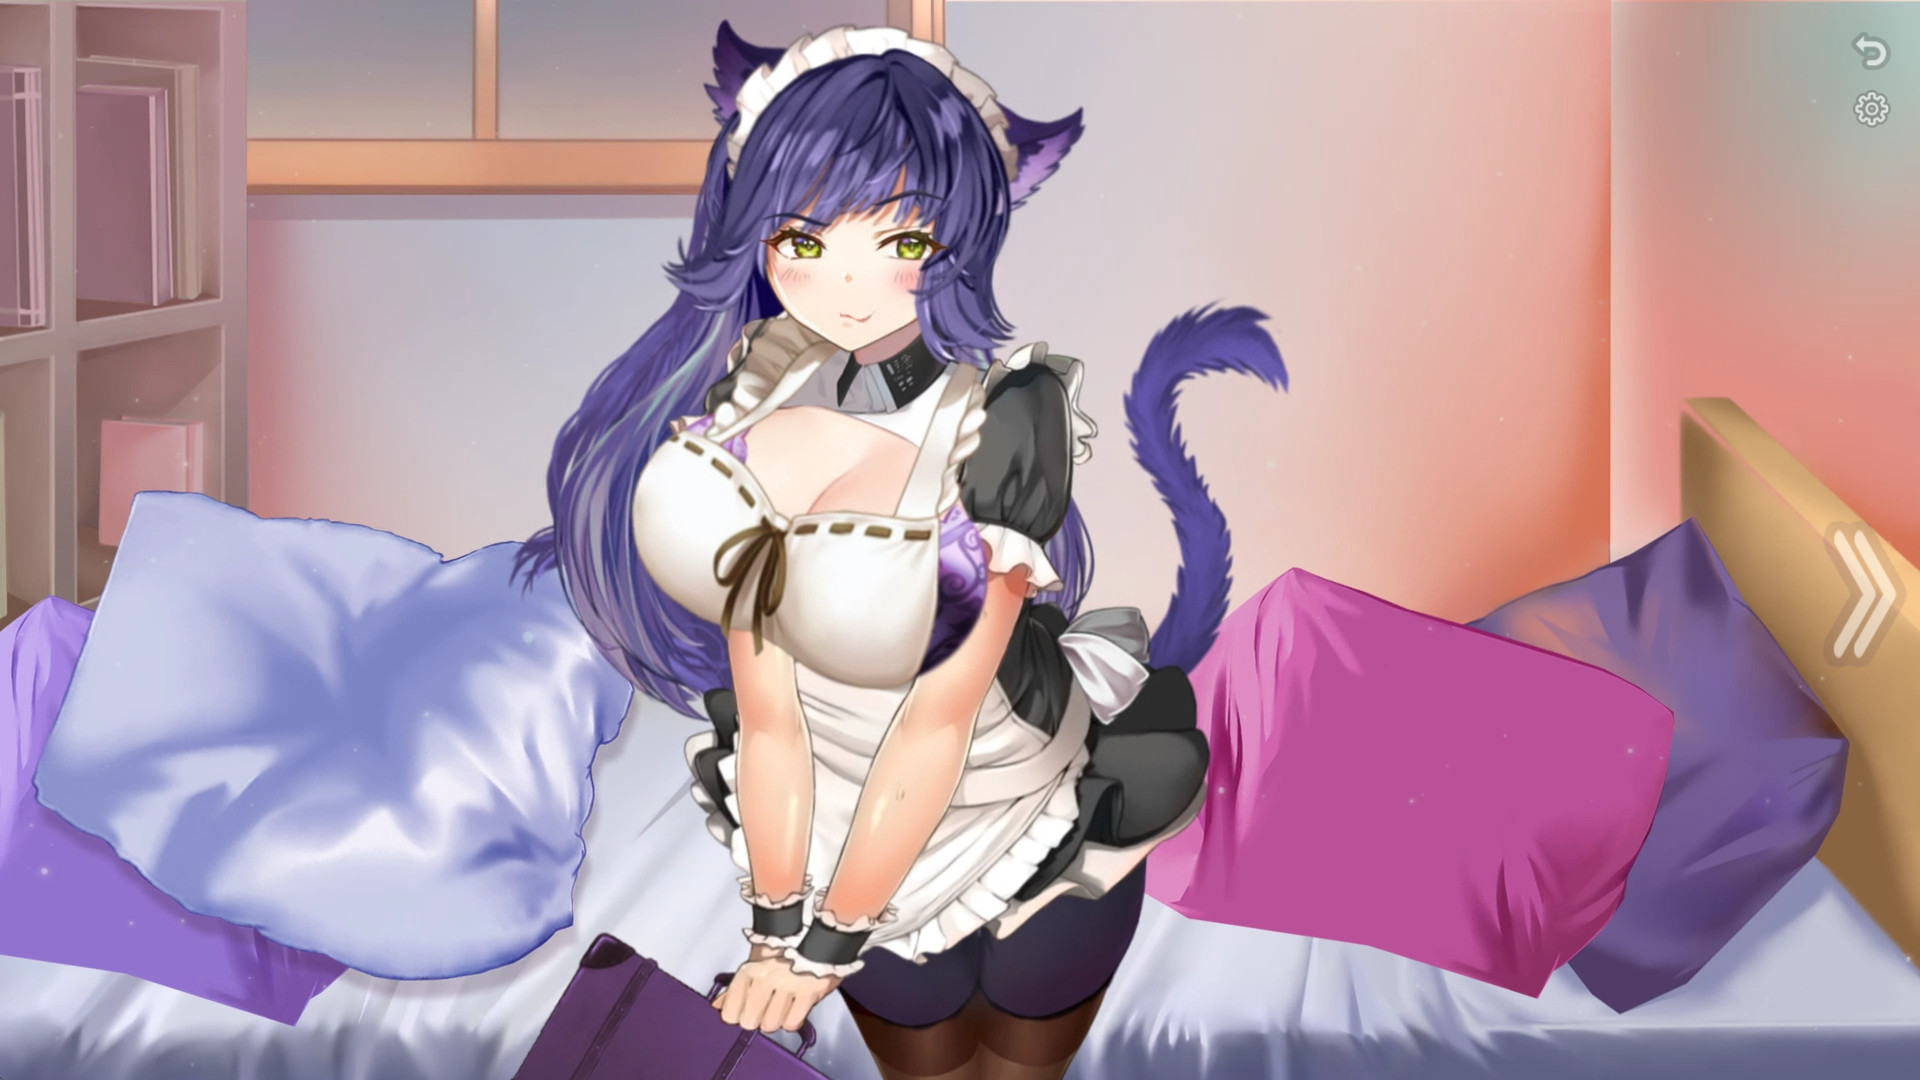 Find the best computers for Neko Maid